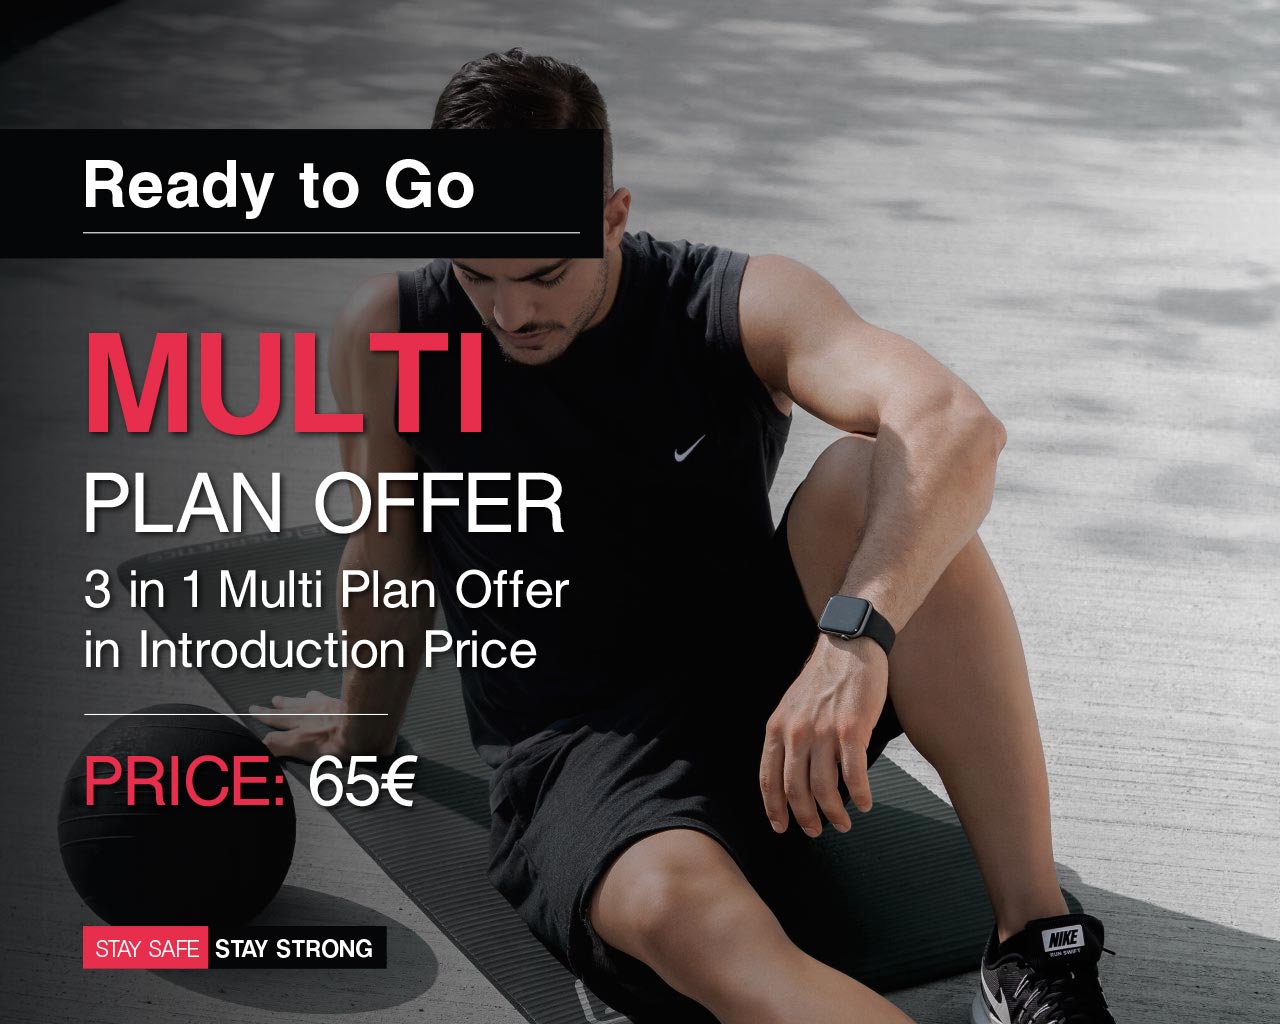 65€ Multi Plan Offer - Offer Price - Get 3 in 1 Workout Programs